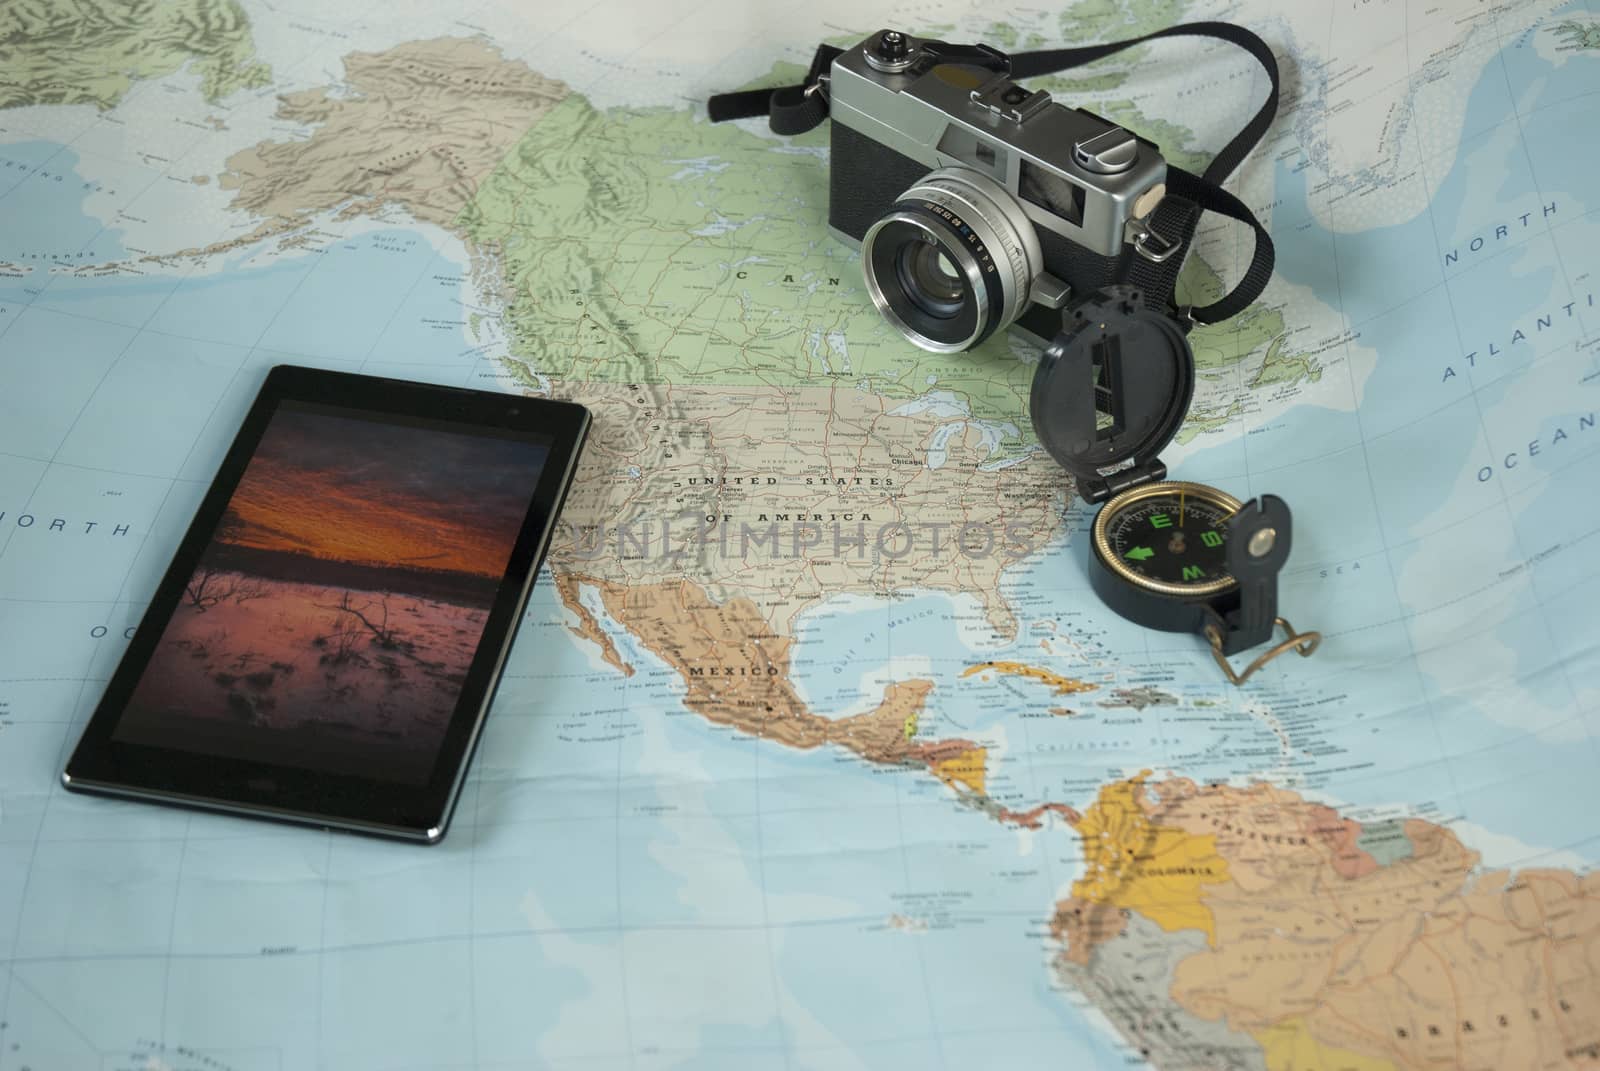 This image shows a world map, a compass and a camera for world travelers